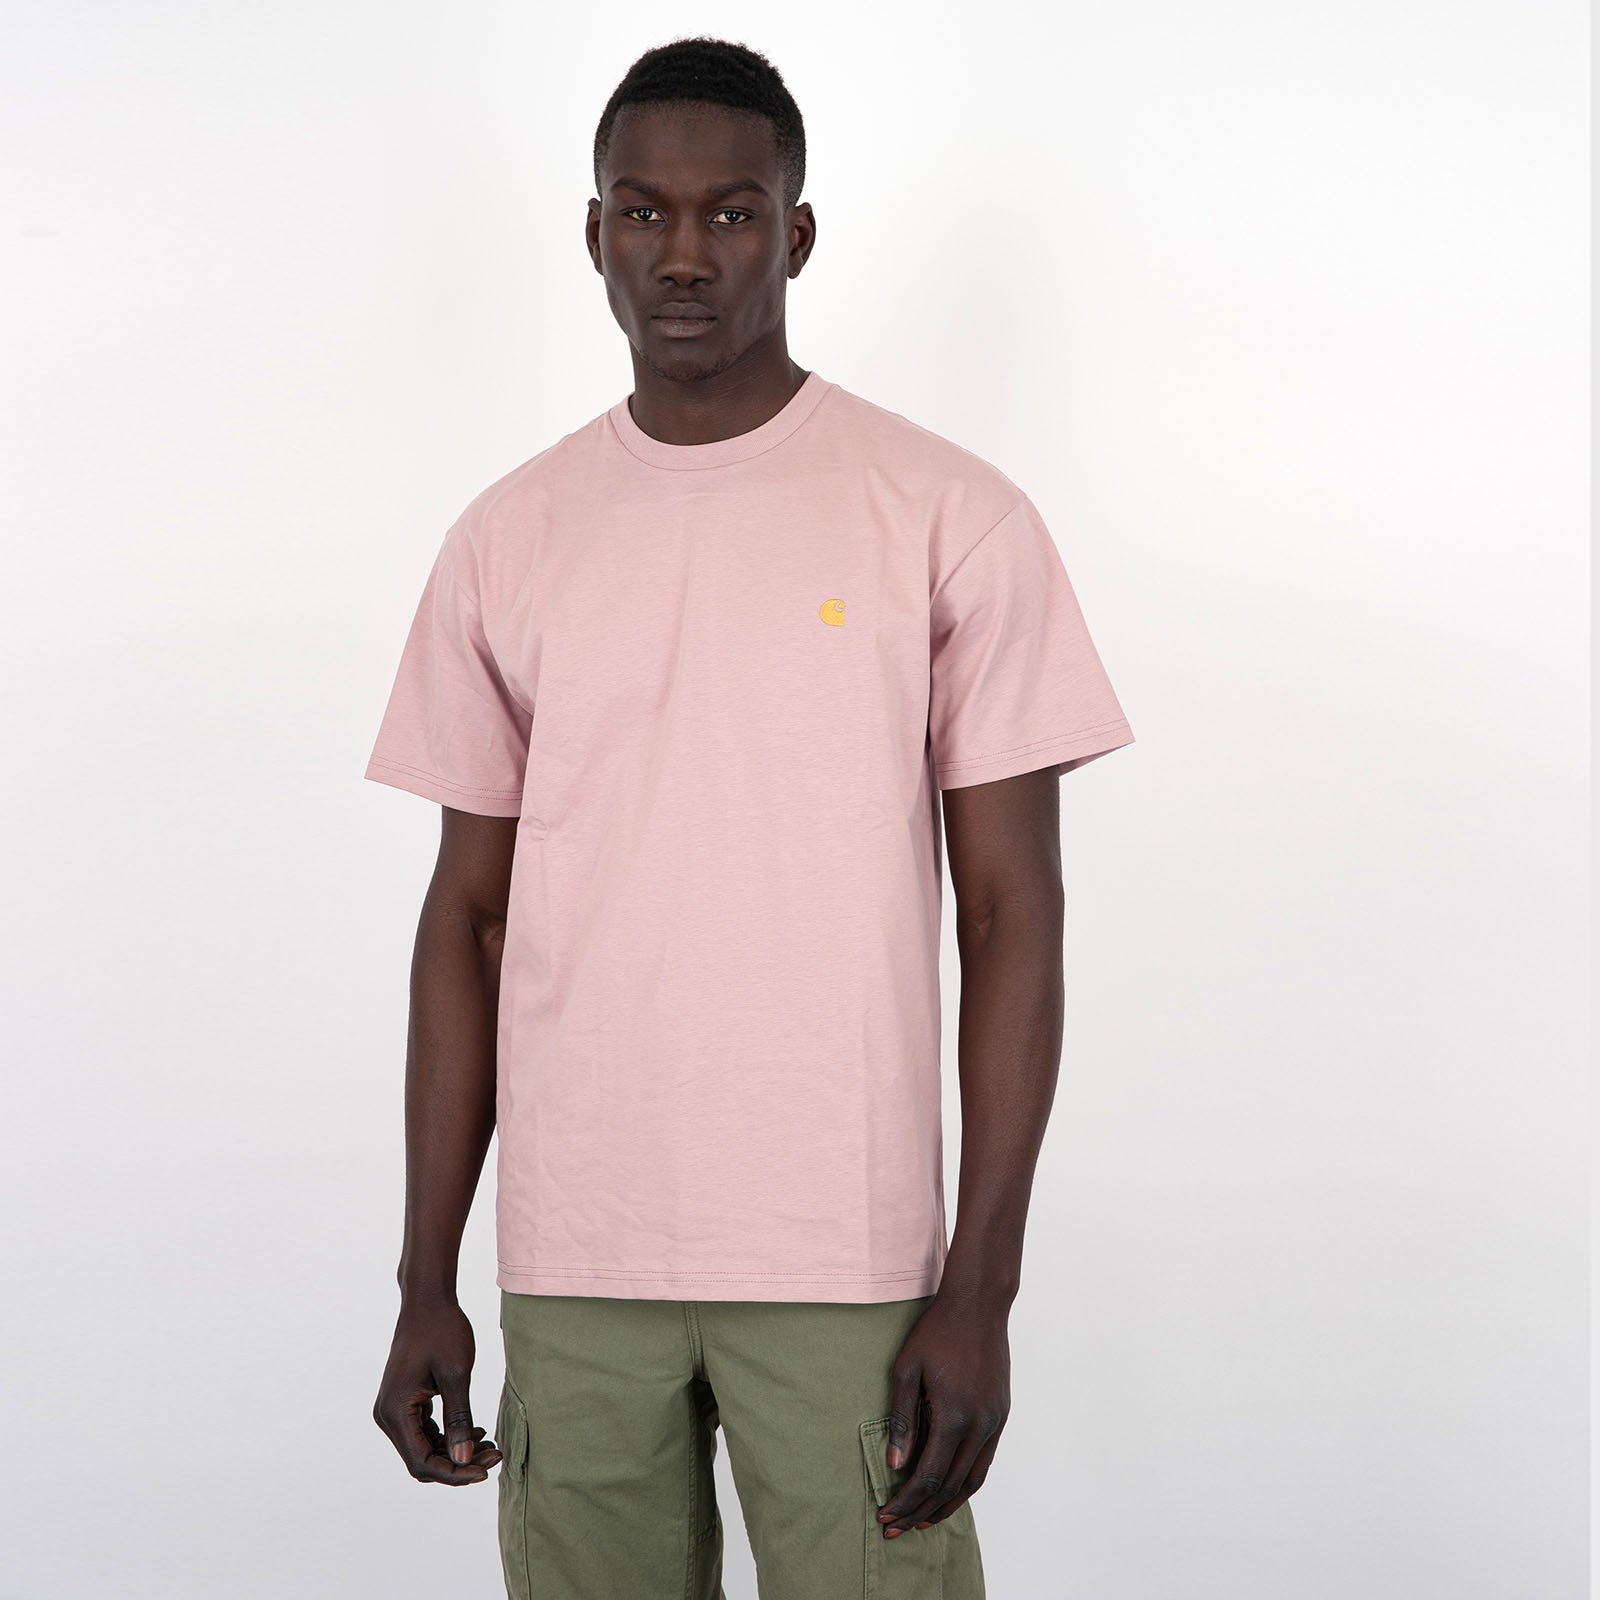 Carhartt WIP T-Shirt S/S Chase Cotton Pink - 6